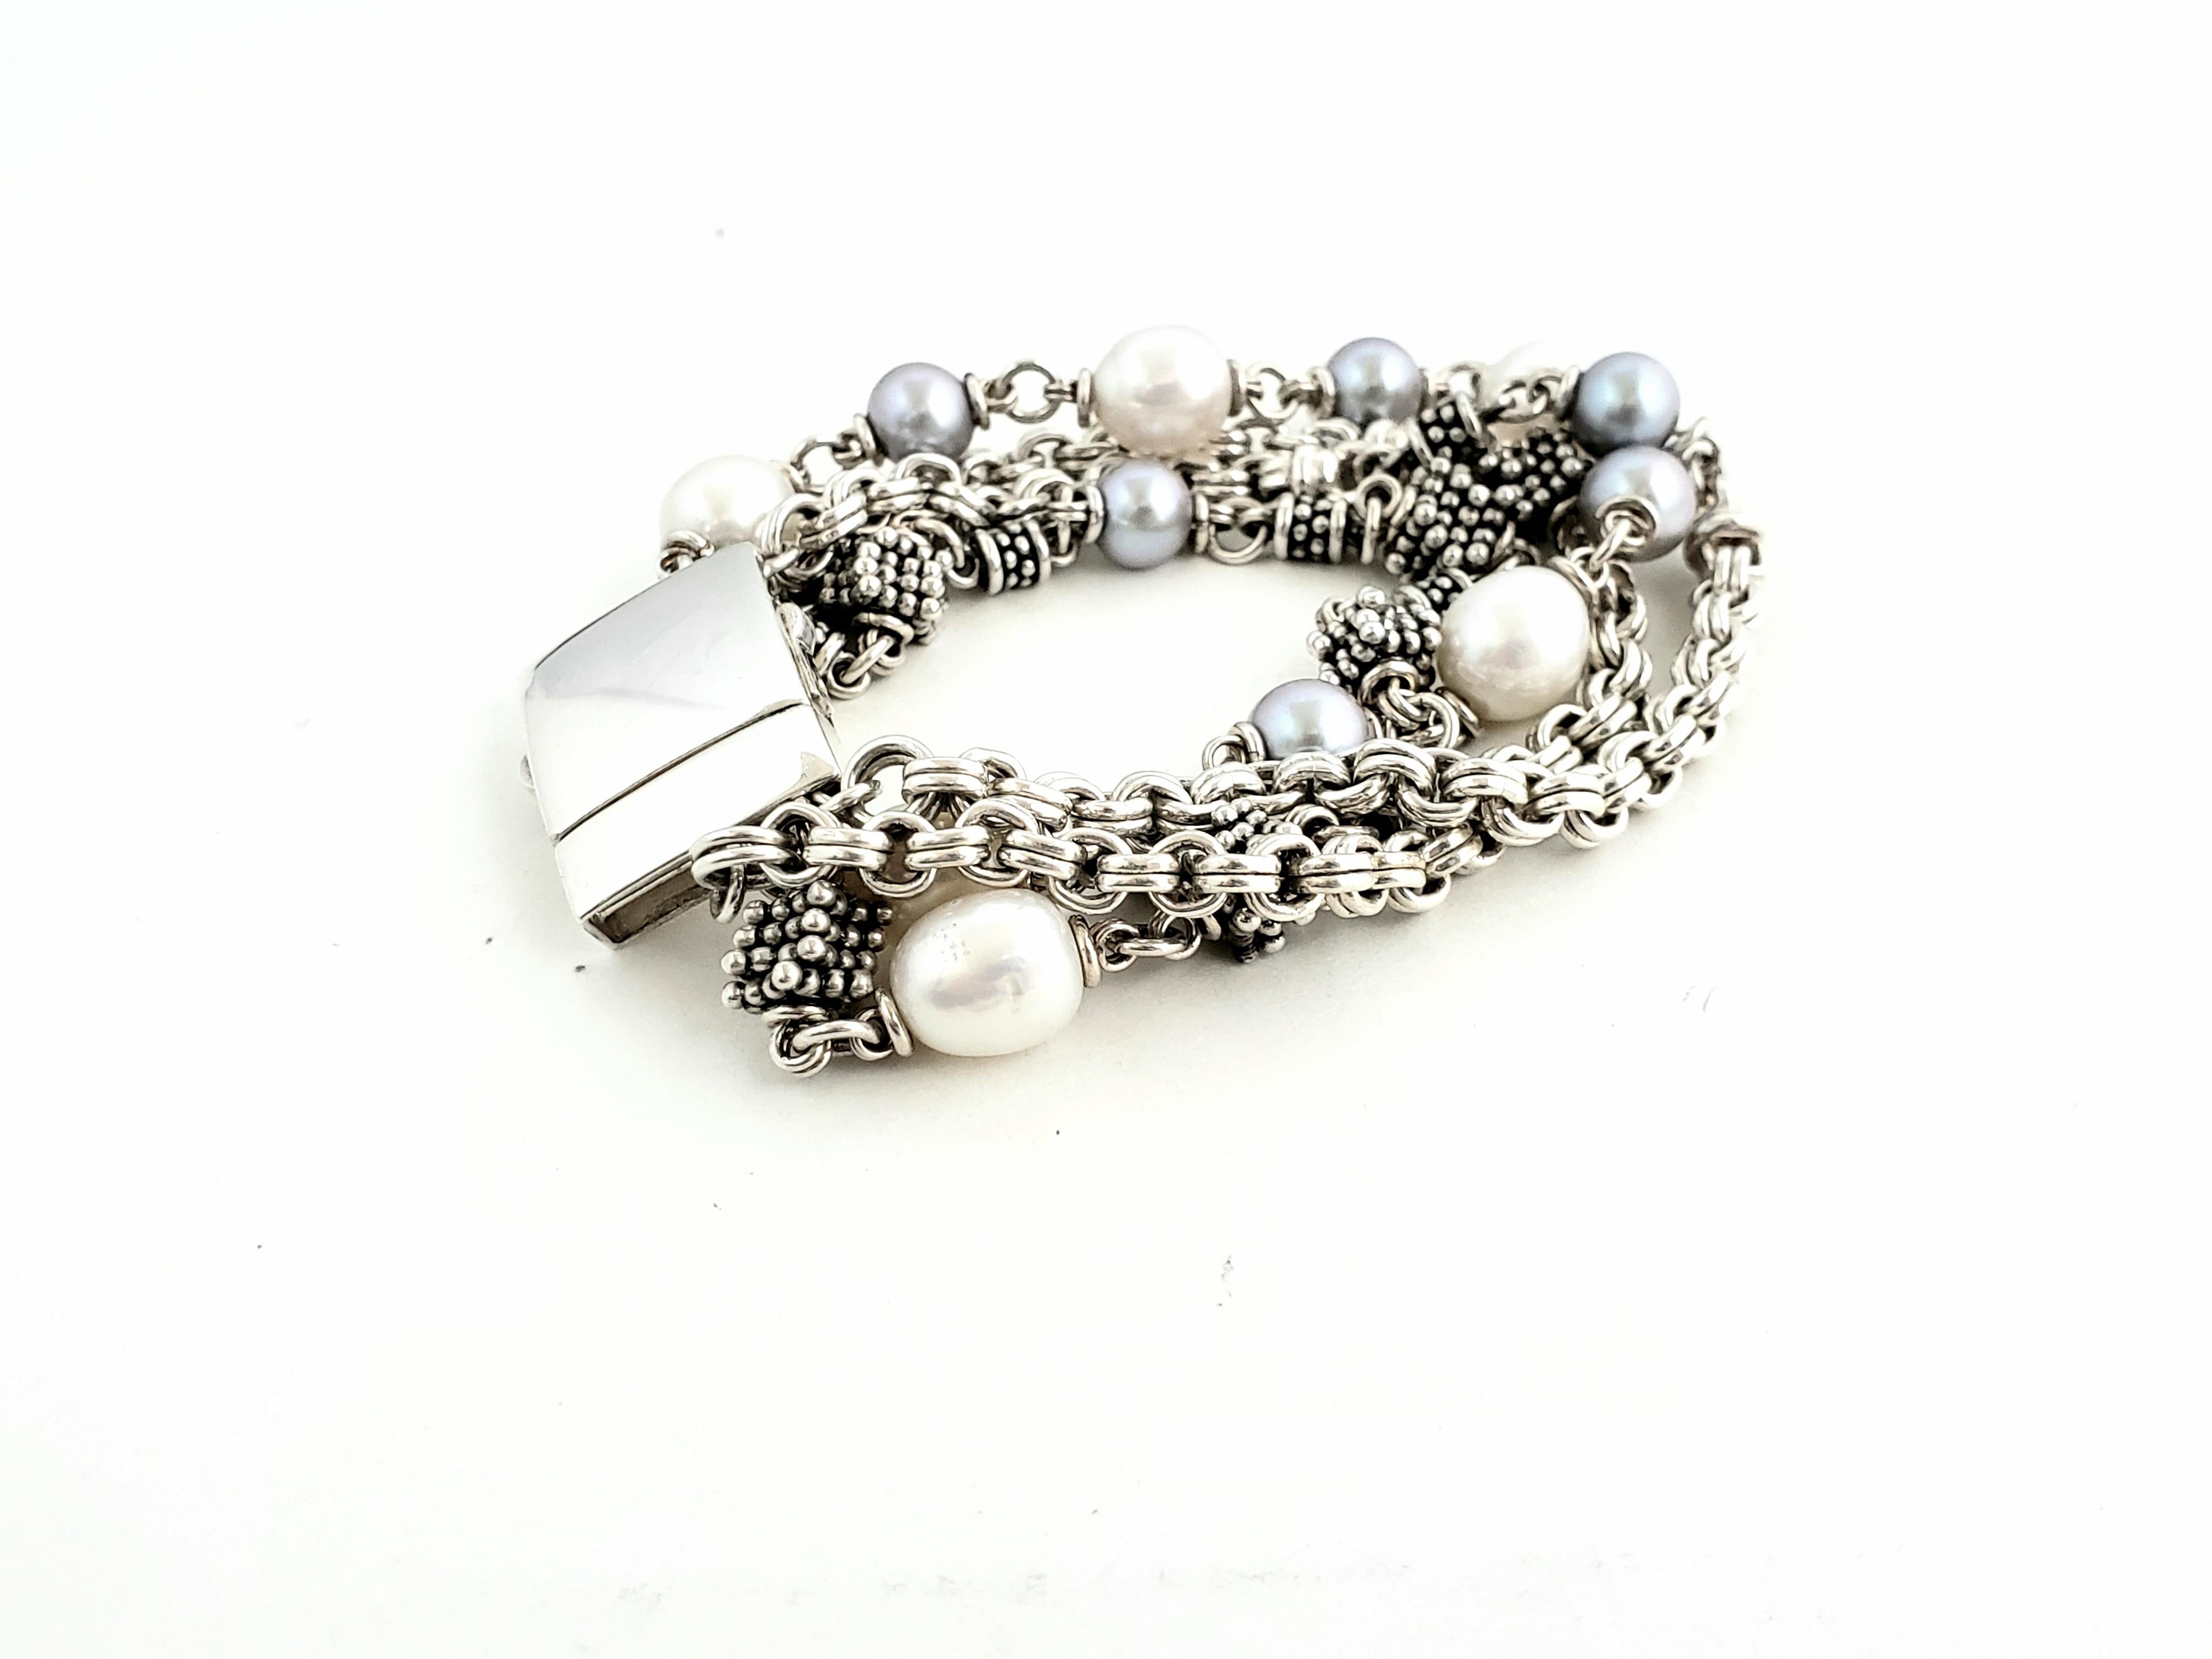 Michael Dawkins Sterling Silver and Pearl MultiStrand Bracelet

Beautiful Michael Dawkins Sterling Silver and white & grey pearl bracelet, The bracelet features four strands with rondel beads, sterling clusters, and gray and white cultured pearls.